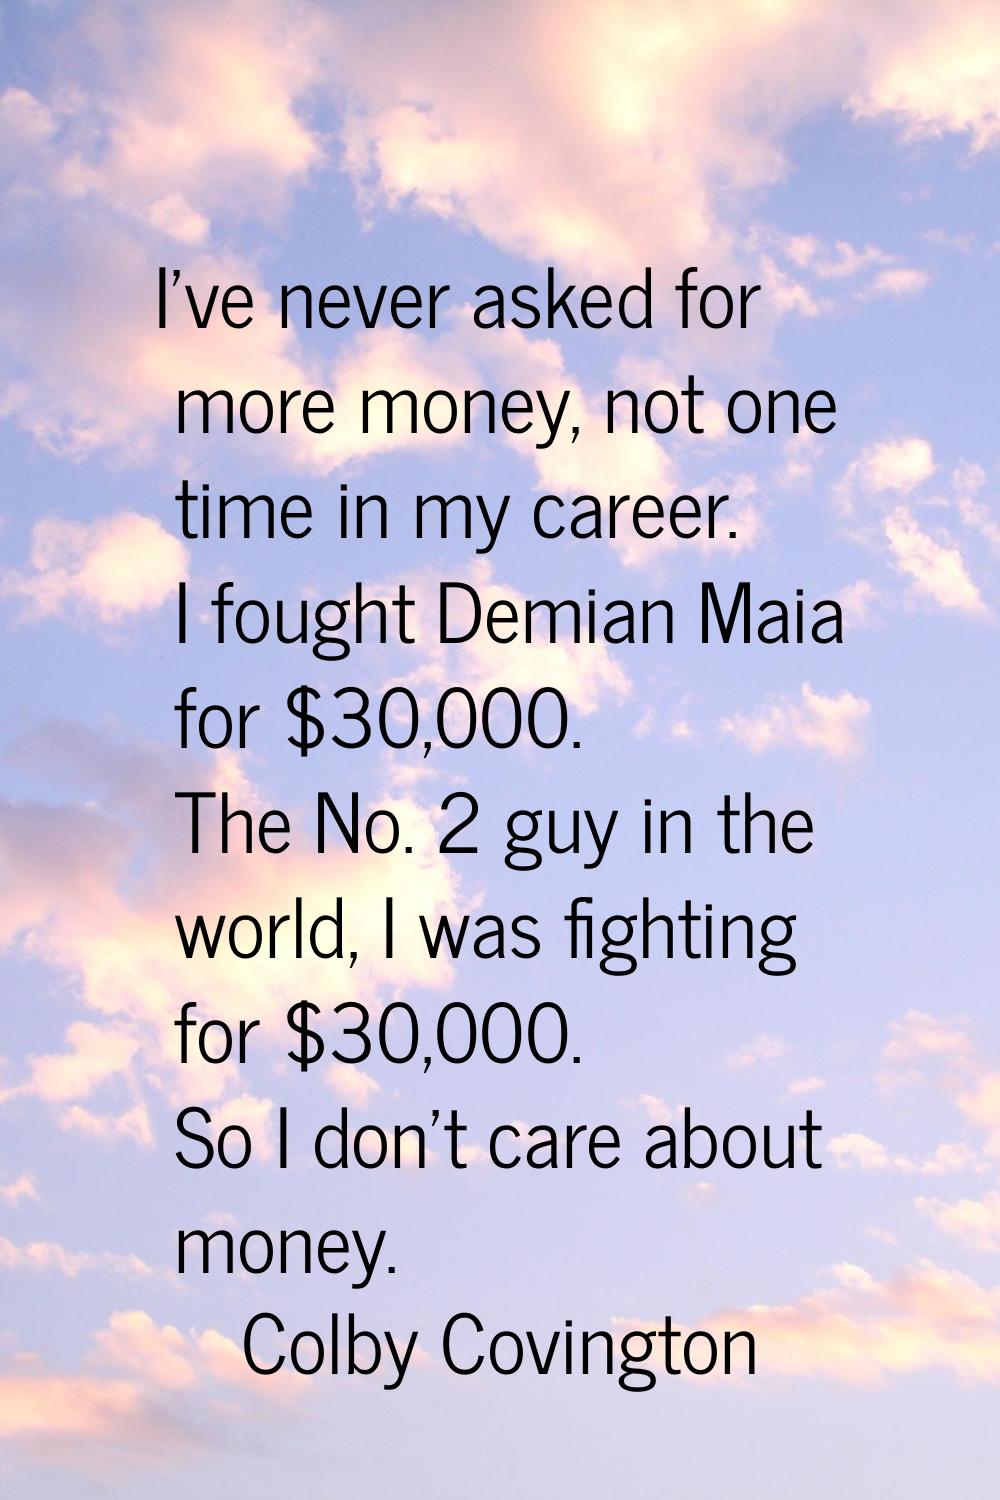 I've never asked for more money, not one time in my career. I fought Demian Maia for $30,000. The N